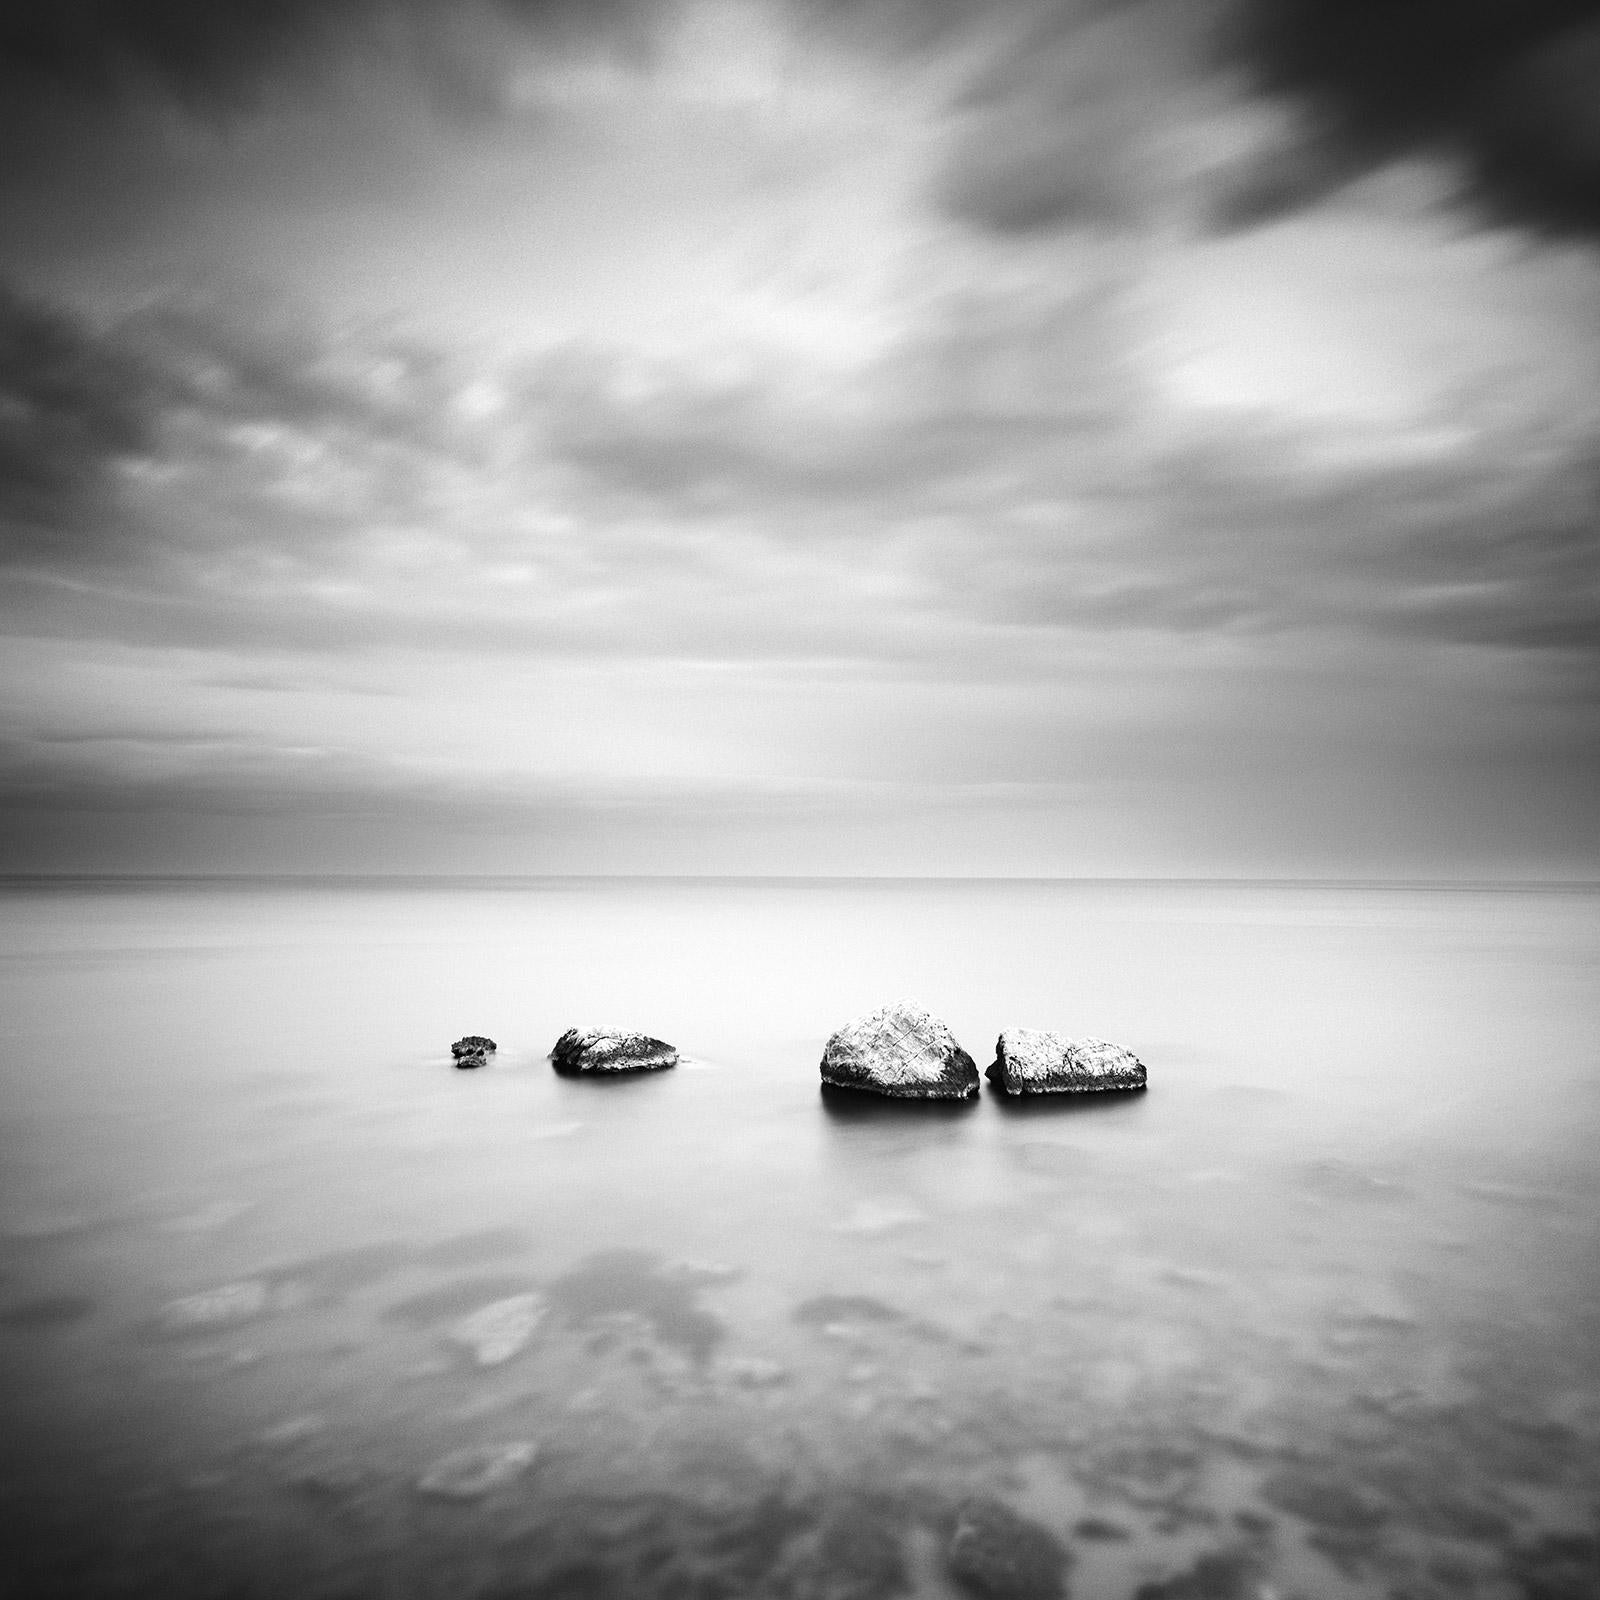  Three and a half Stone, Spain, black and white print, long exposure landscape